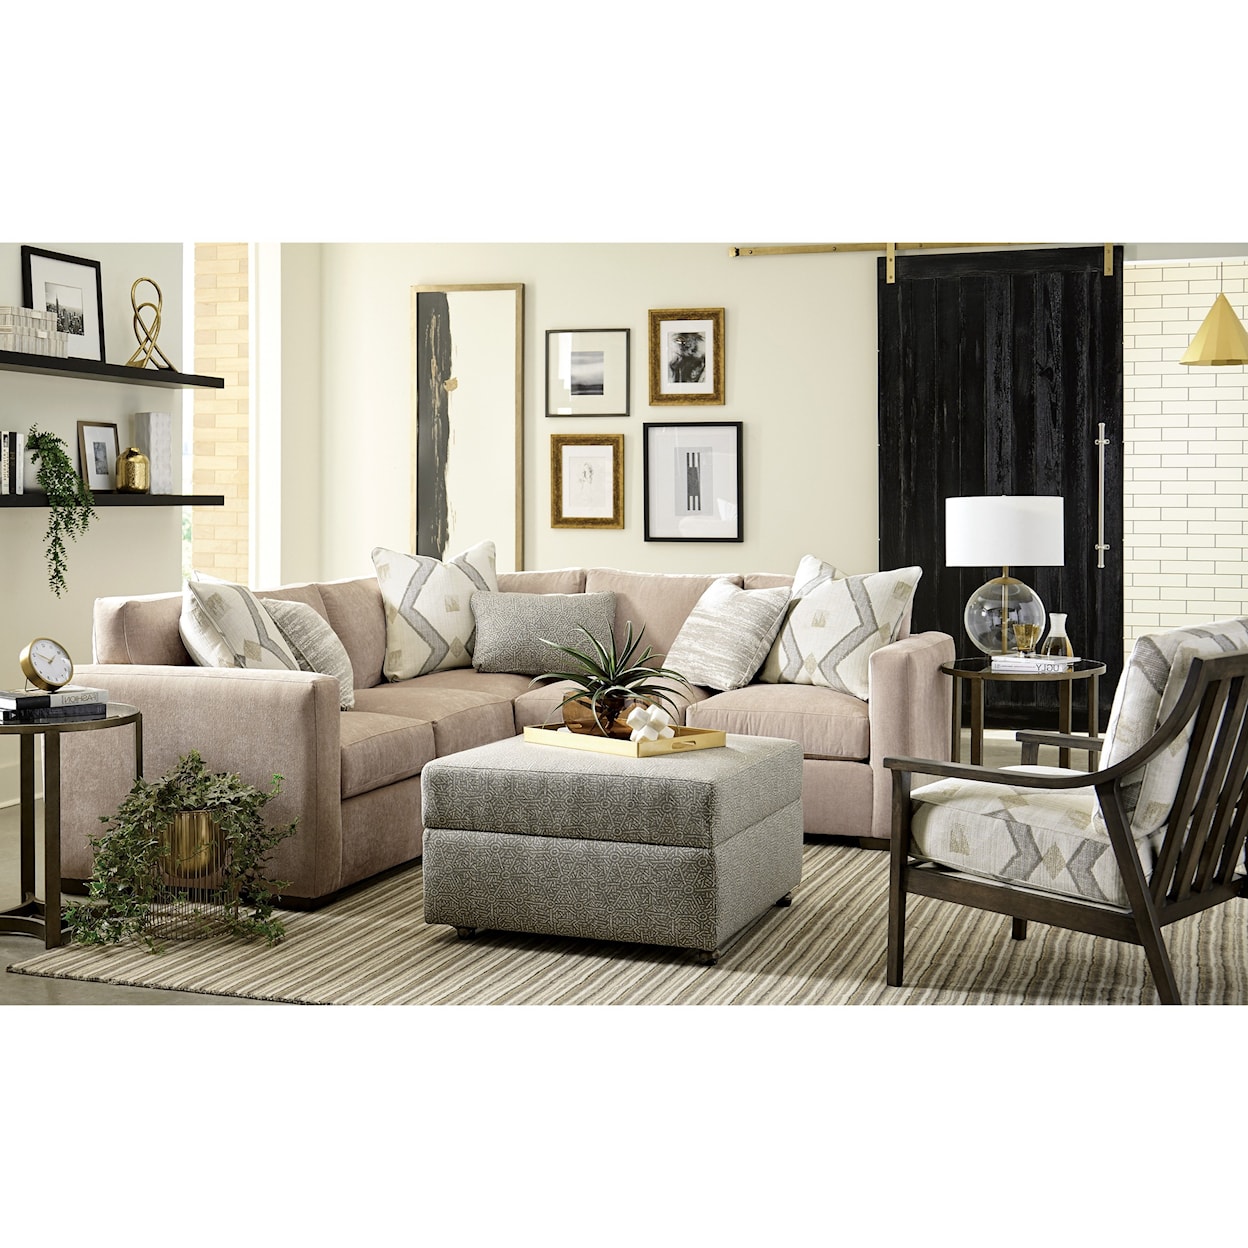 Craftmaster Modern Elements 2-Piece Sectional with LAF Corner Sofa